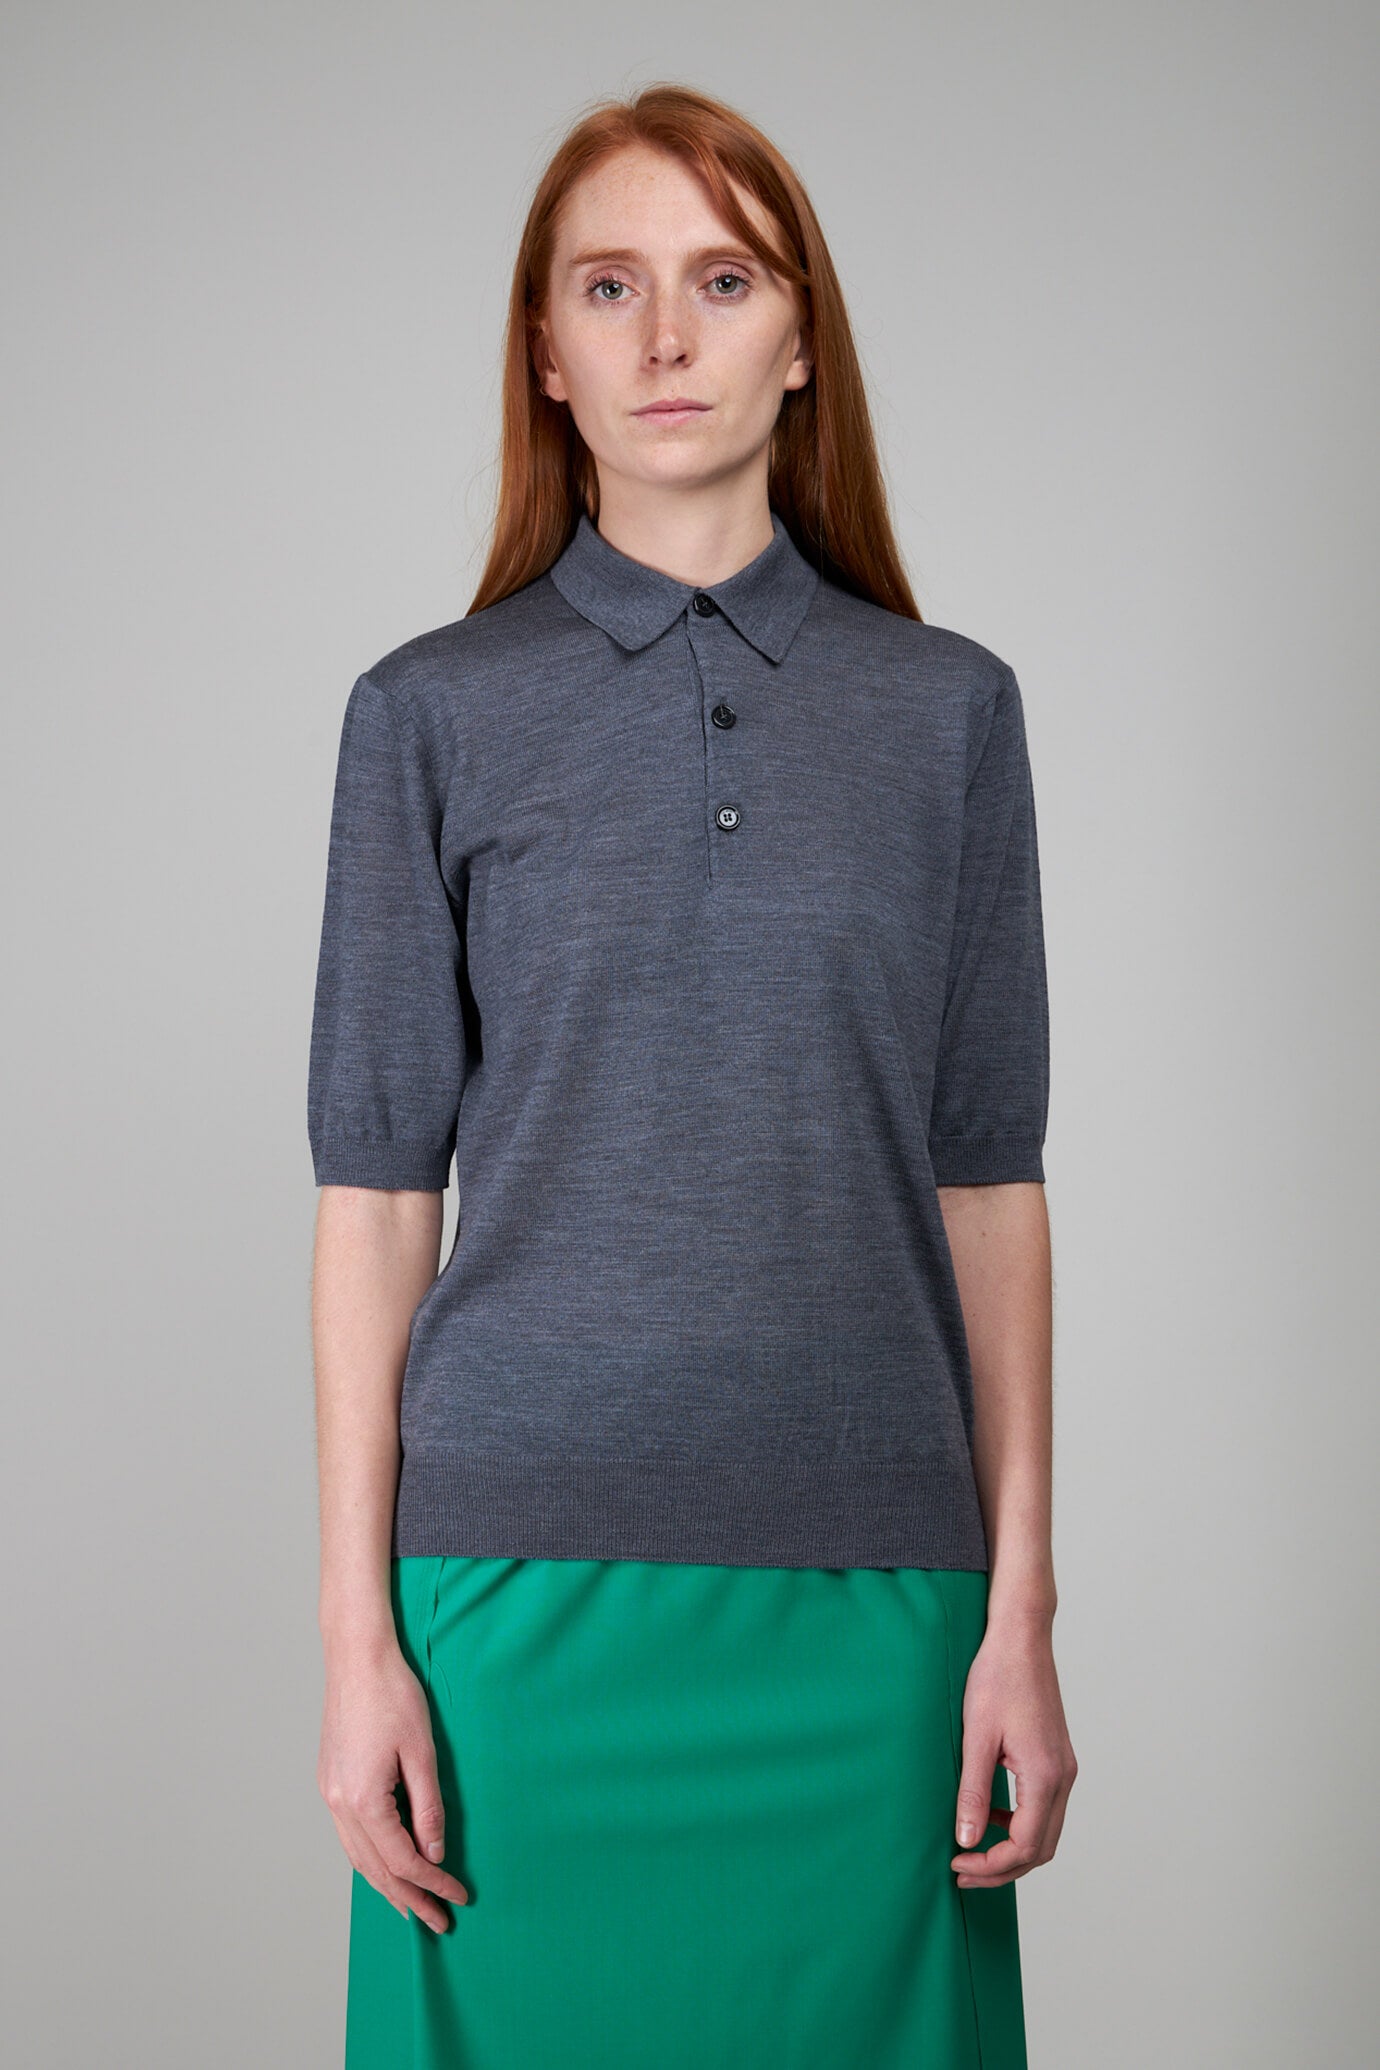 Short Sleeve Knit Polo with PVB Patch, grey